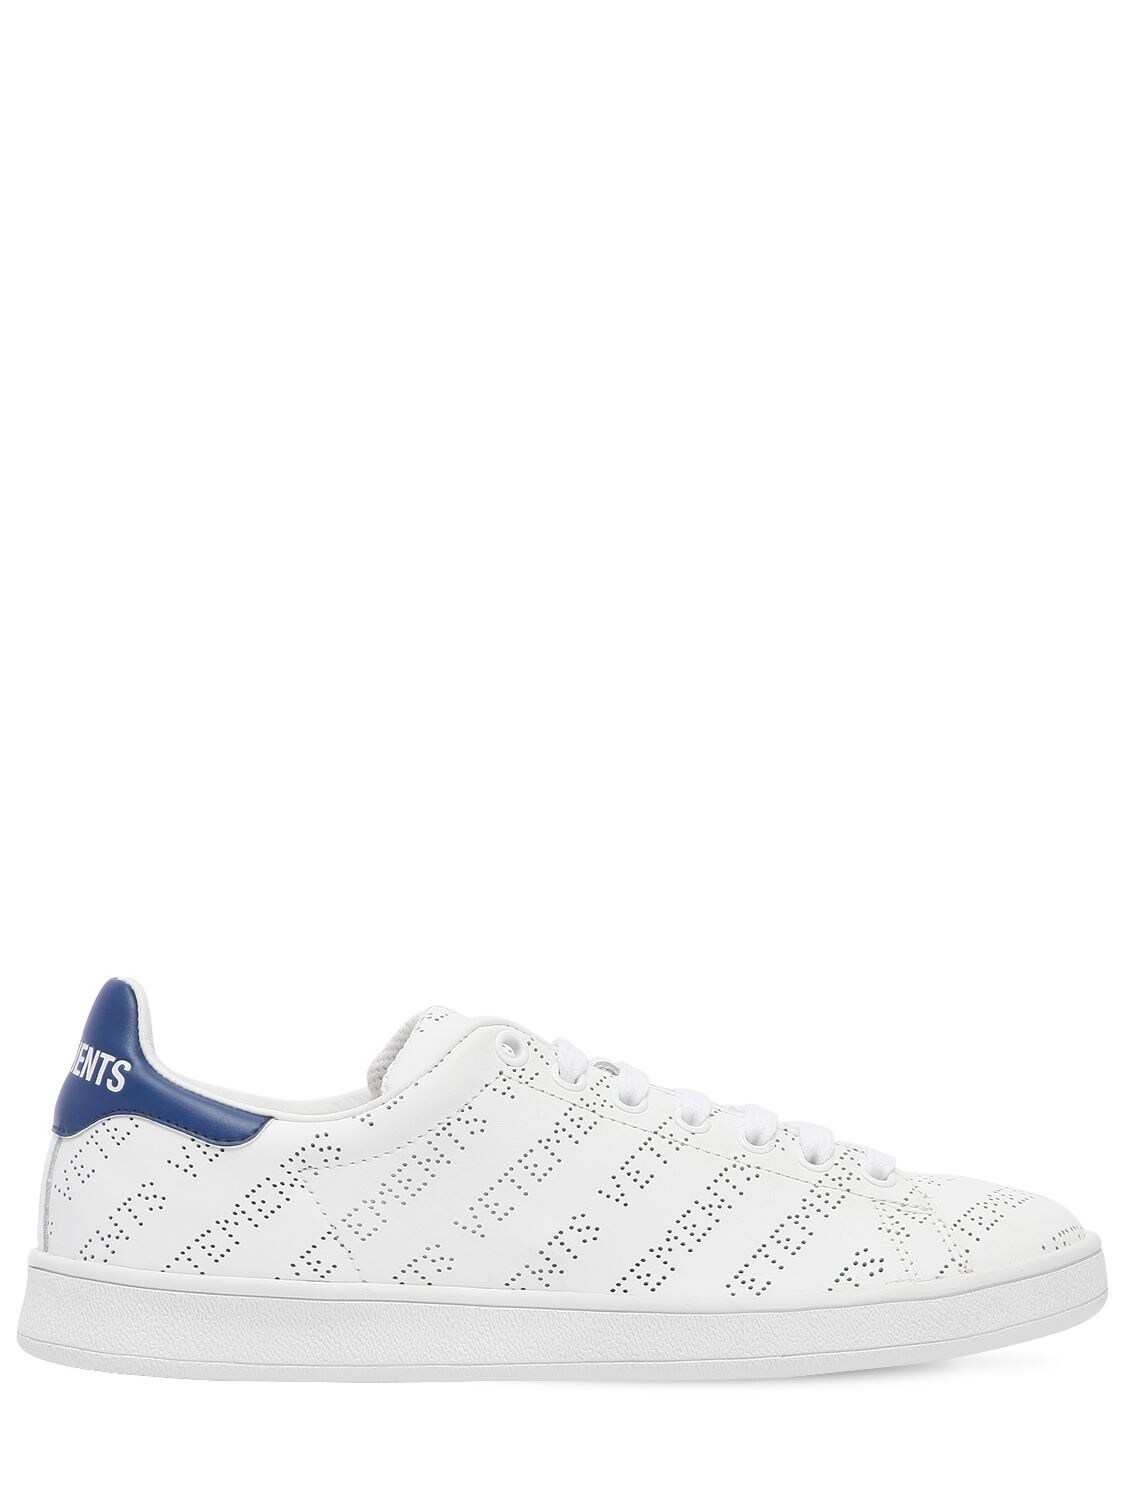 VETEMENTS 20MM LOGO PERFORATED LEATHER SNEAKERS,67IIA7001-V0hJVEUvQkxVRQ2